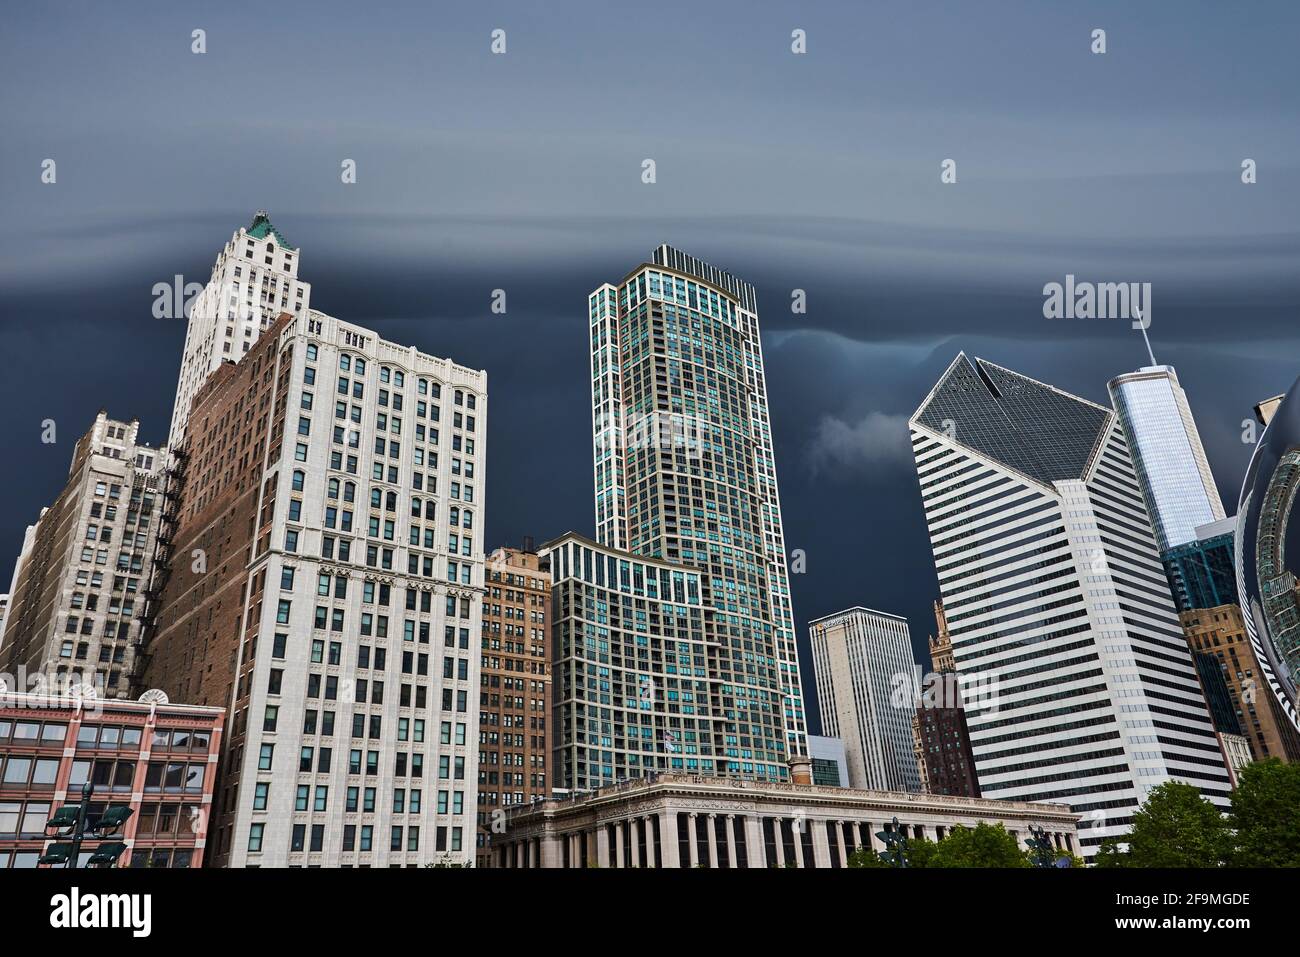 Dramatic storm front clouds gathering over Chicago Skyline Stock Photo